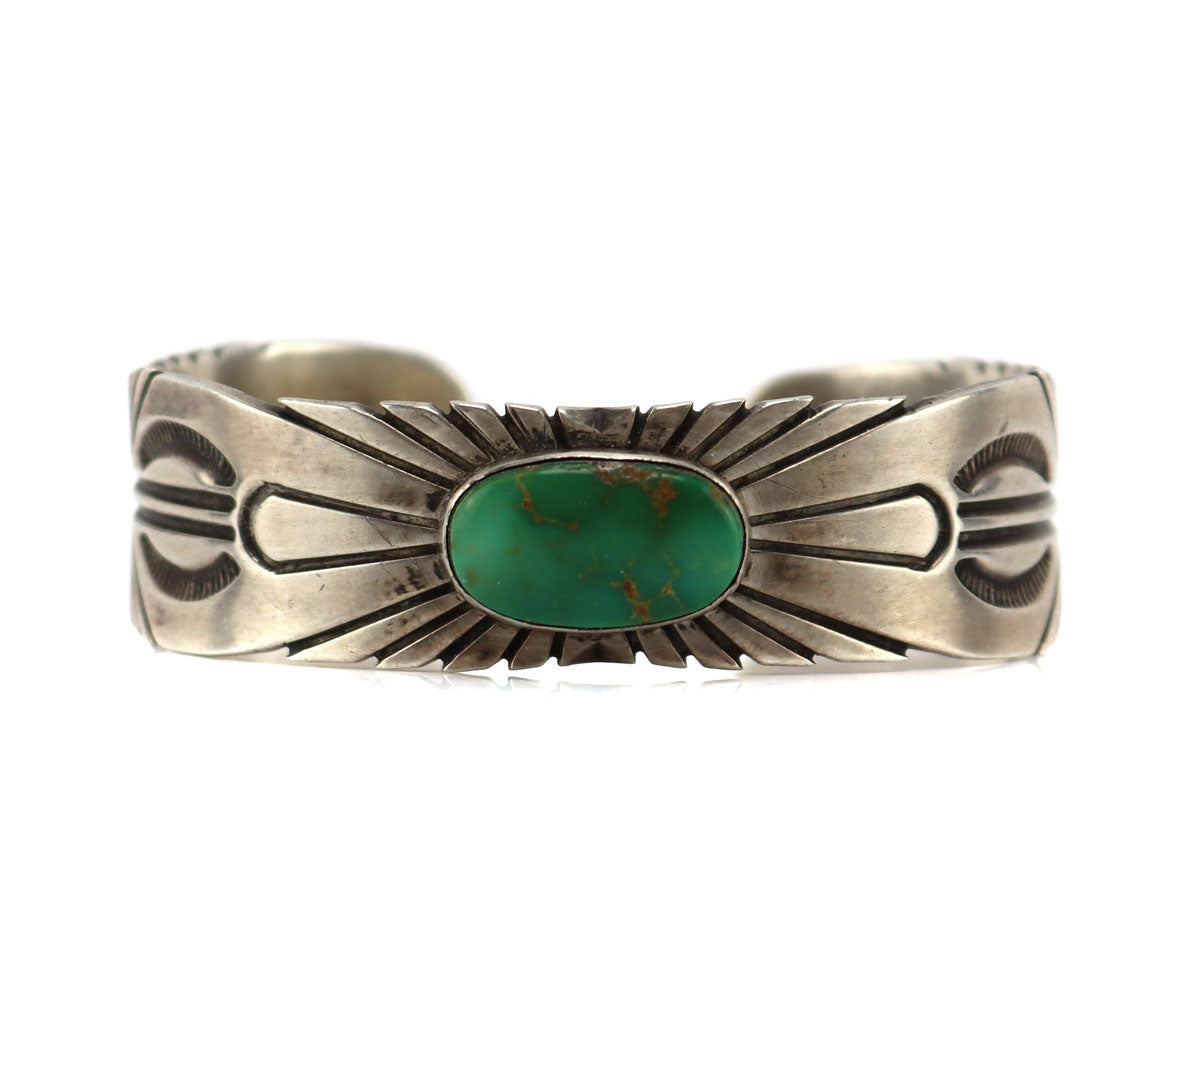 Signed Navajo Sterling Silver Indian Mountain Turquoise Tufa Cast Cuff  Bracelet | eBay